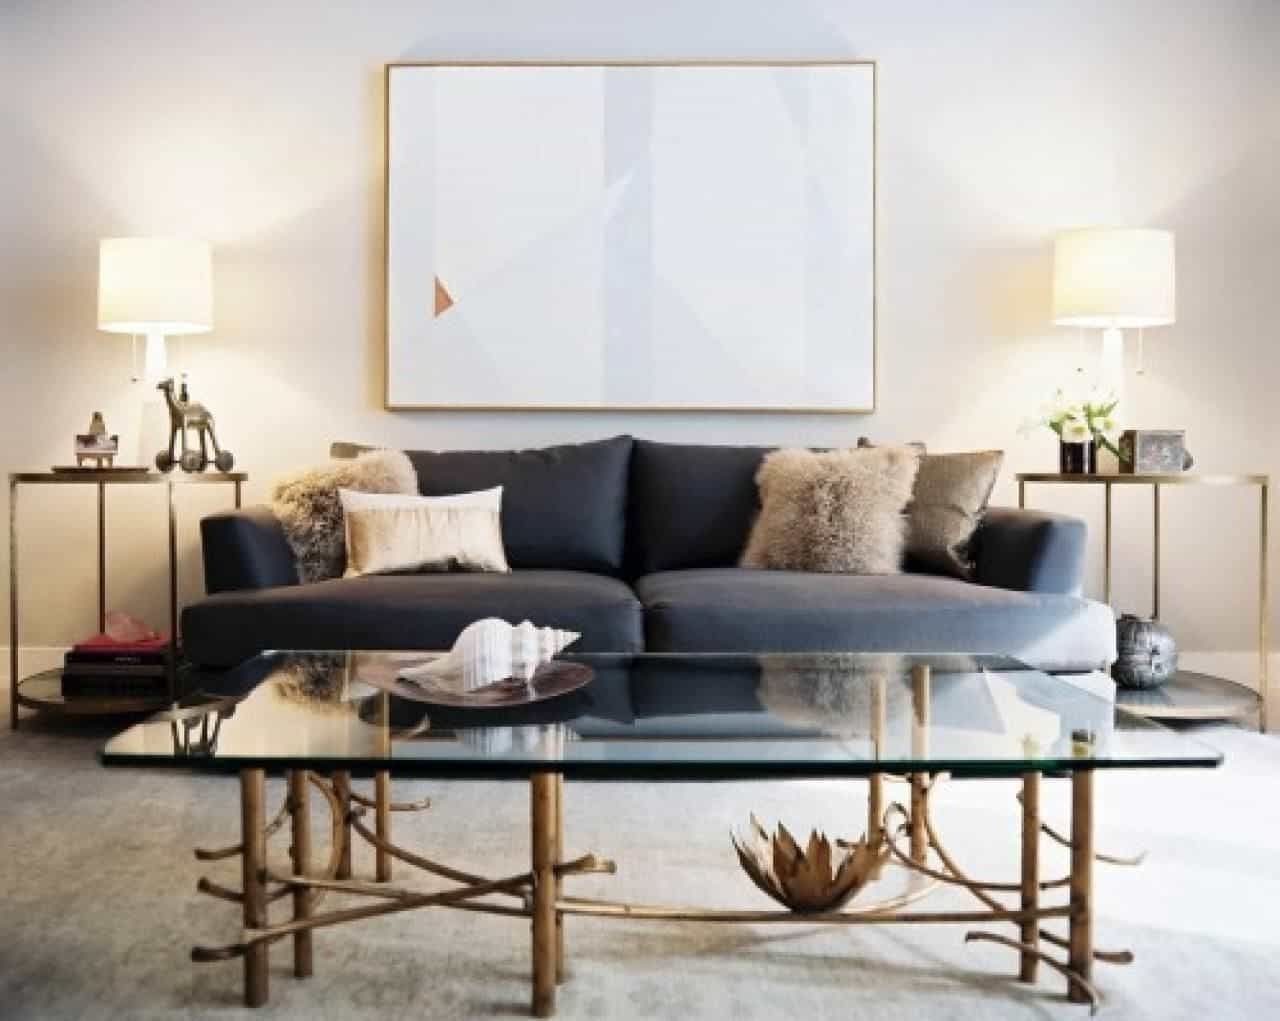 Modern Living Room With Grey Sofa And Side Tables With Table Lamps Pertaining To Best And Newest Modern Living Room Table Lamps (View 9 of 15)